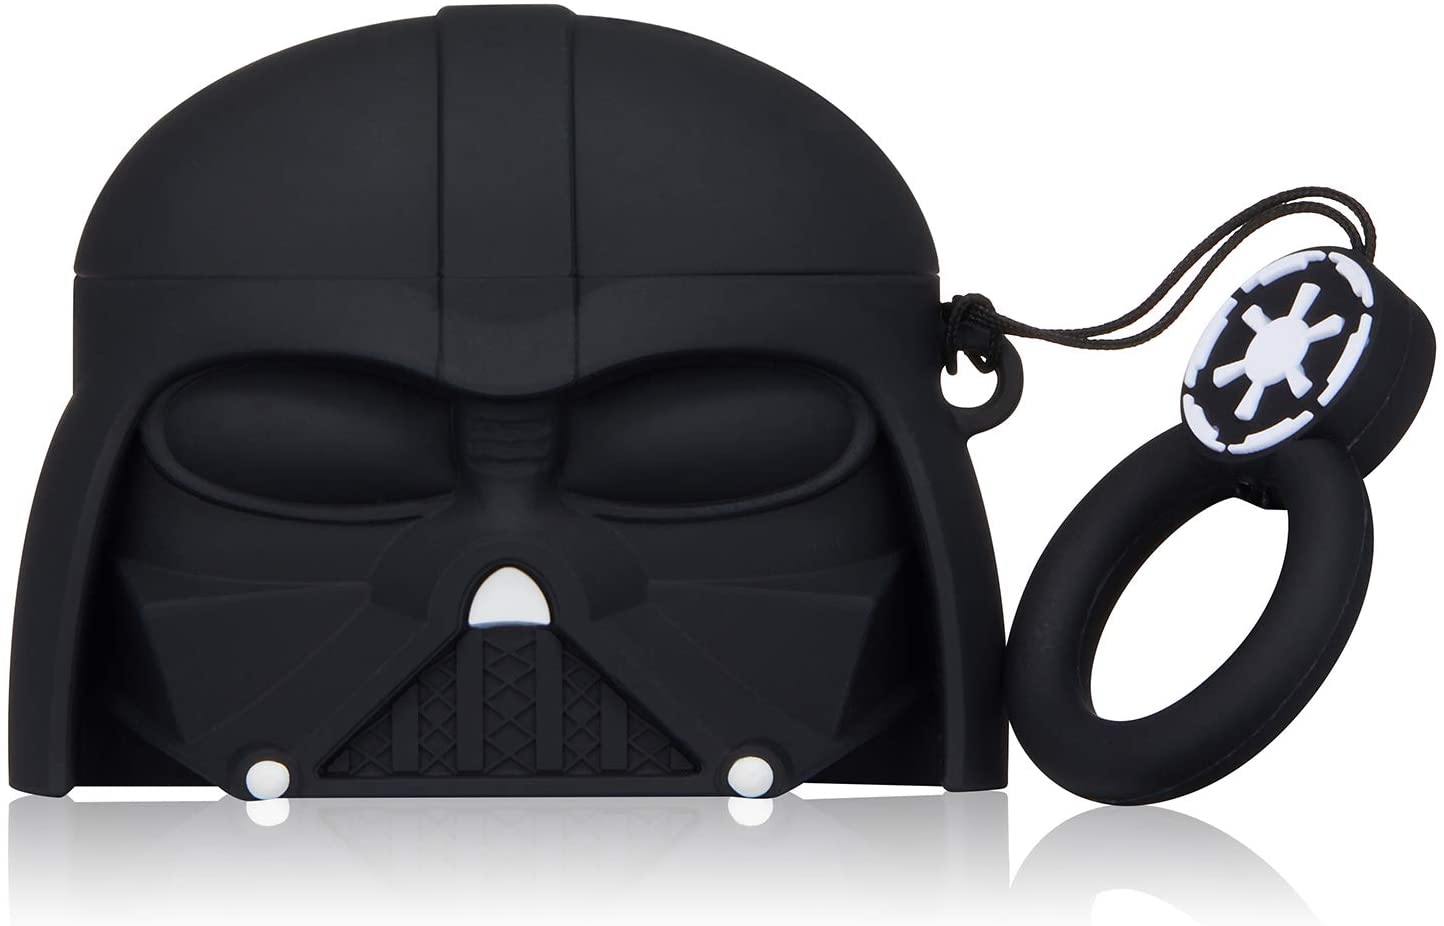 Dark Vader with Ring Star Wars Apple Airpods Pro Case - Lottemi